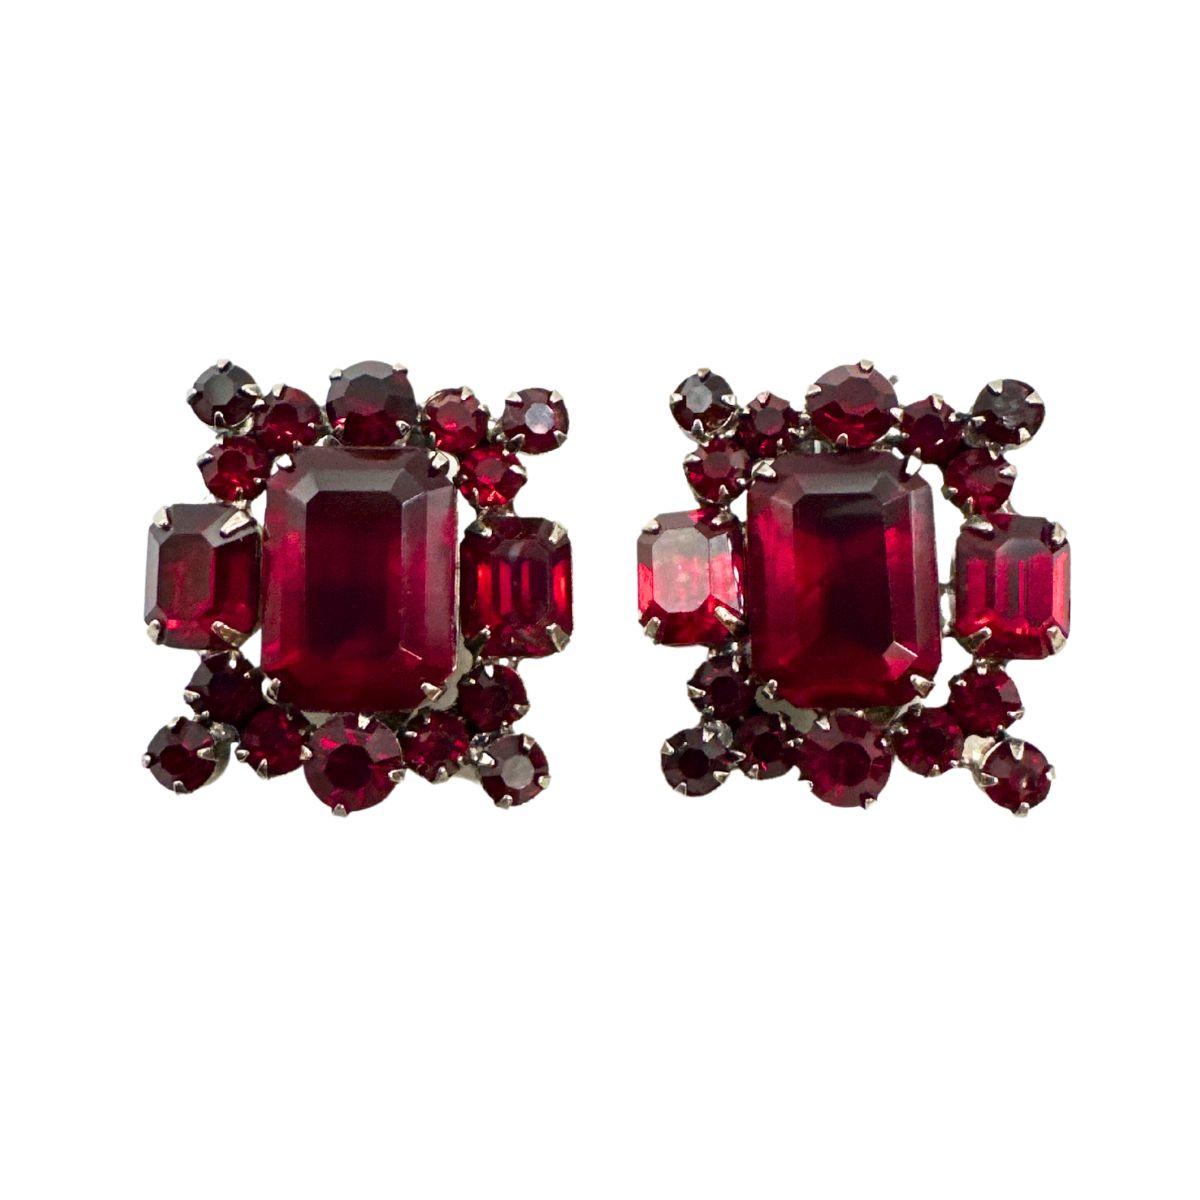 Earring Size: 1.22″ x 1.17″

Bin Code: E16 / P2

Capture the essence of vintage glamour with these Antique Earring Unsigned Julianna Multi-Shape Red Cut Glass Earrings. These exquisite earrings feature a stunning array of multi-shaped red cut glass